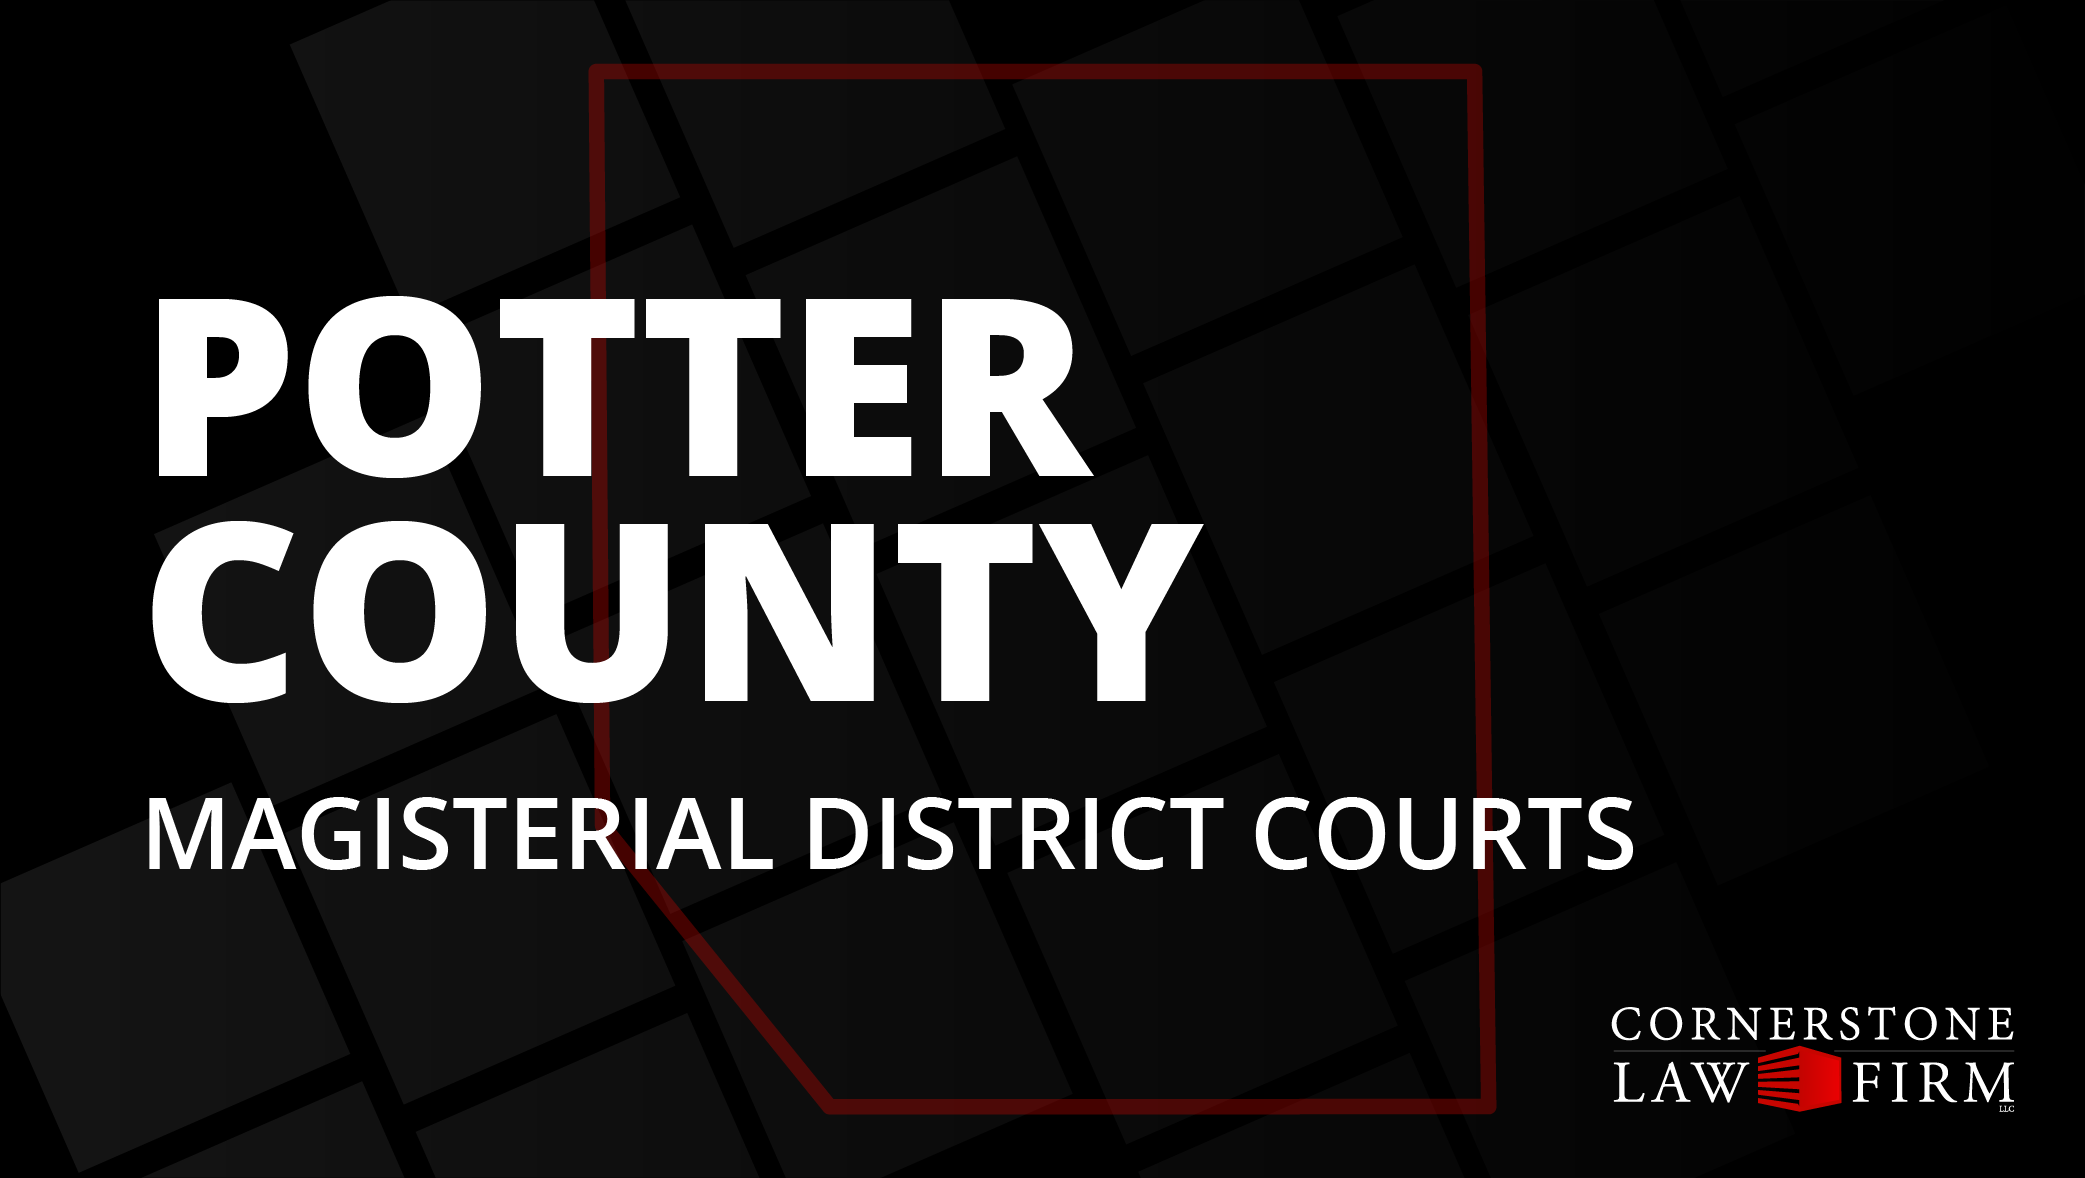 The words "Potter County Magisterial District Courts" over a black background with a faded red outline of the county.